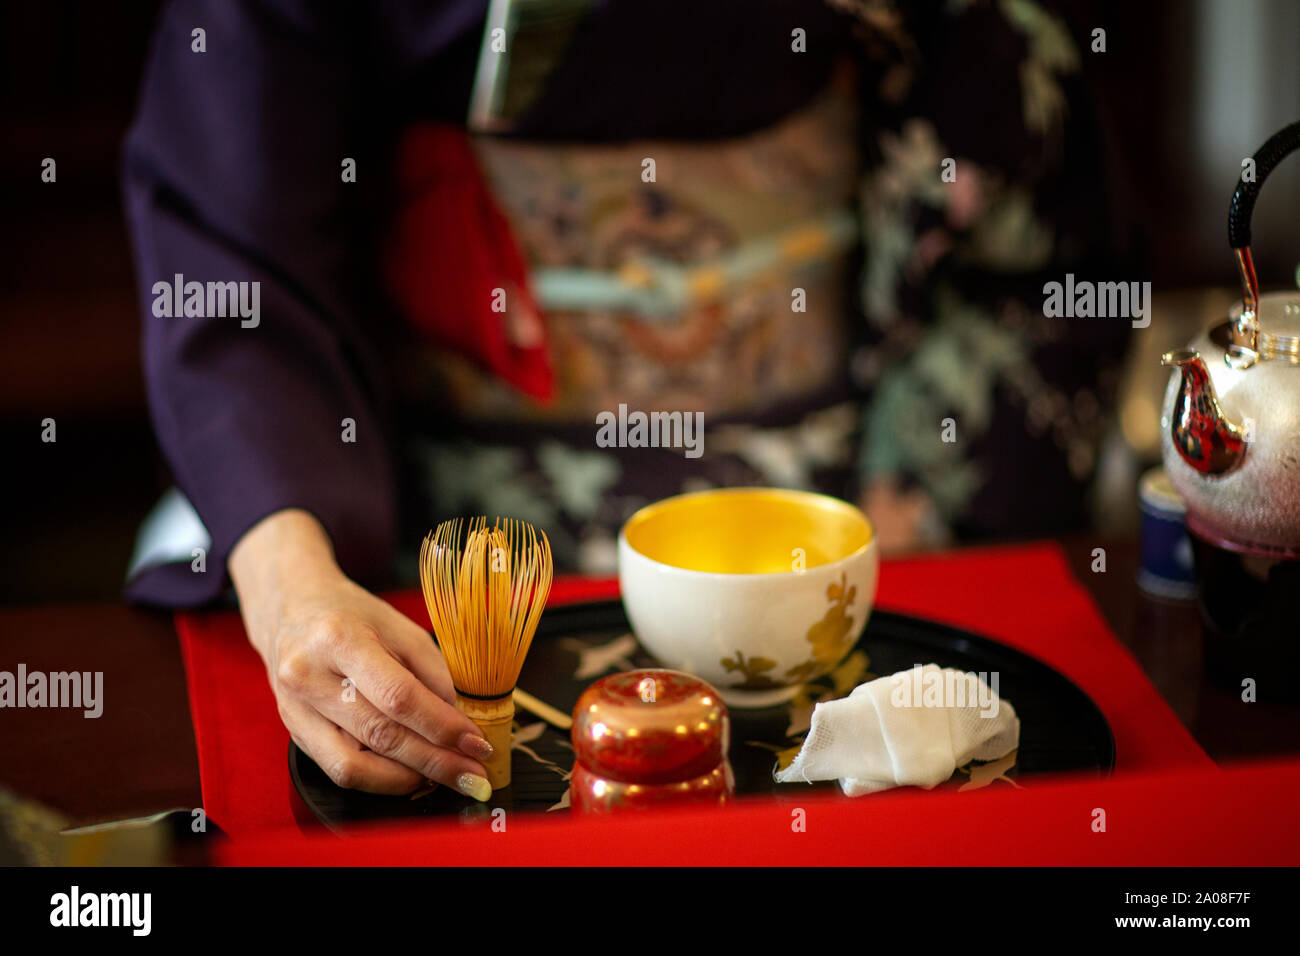 A woman wearing a kimono during a traditional Japanese tea ceremony Stock Photo